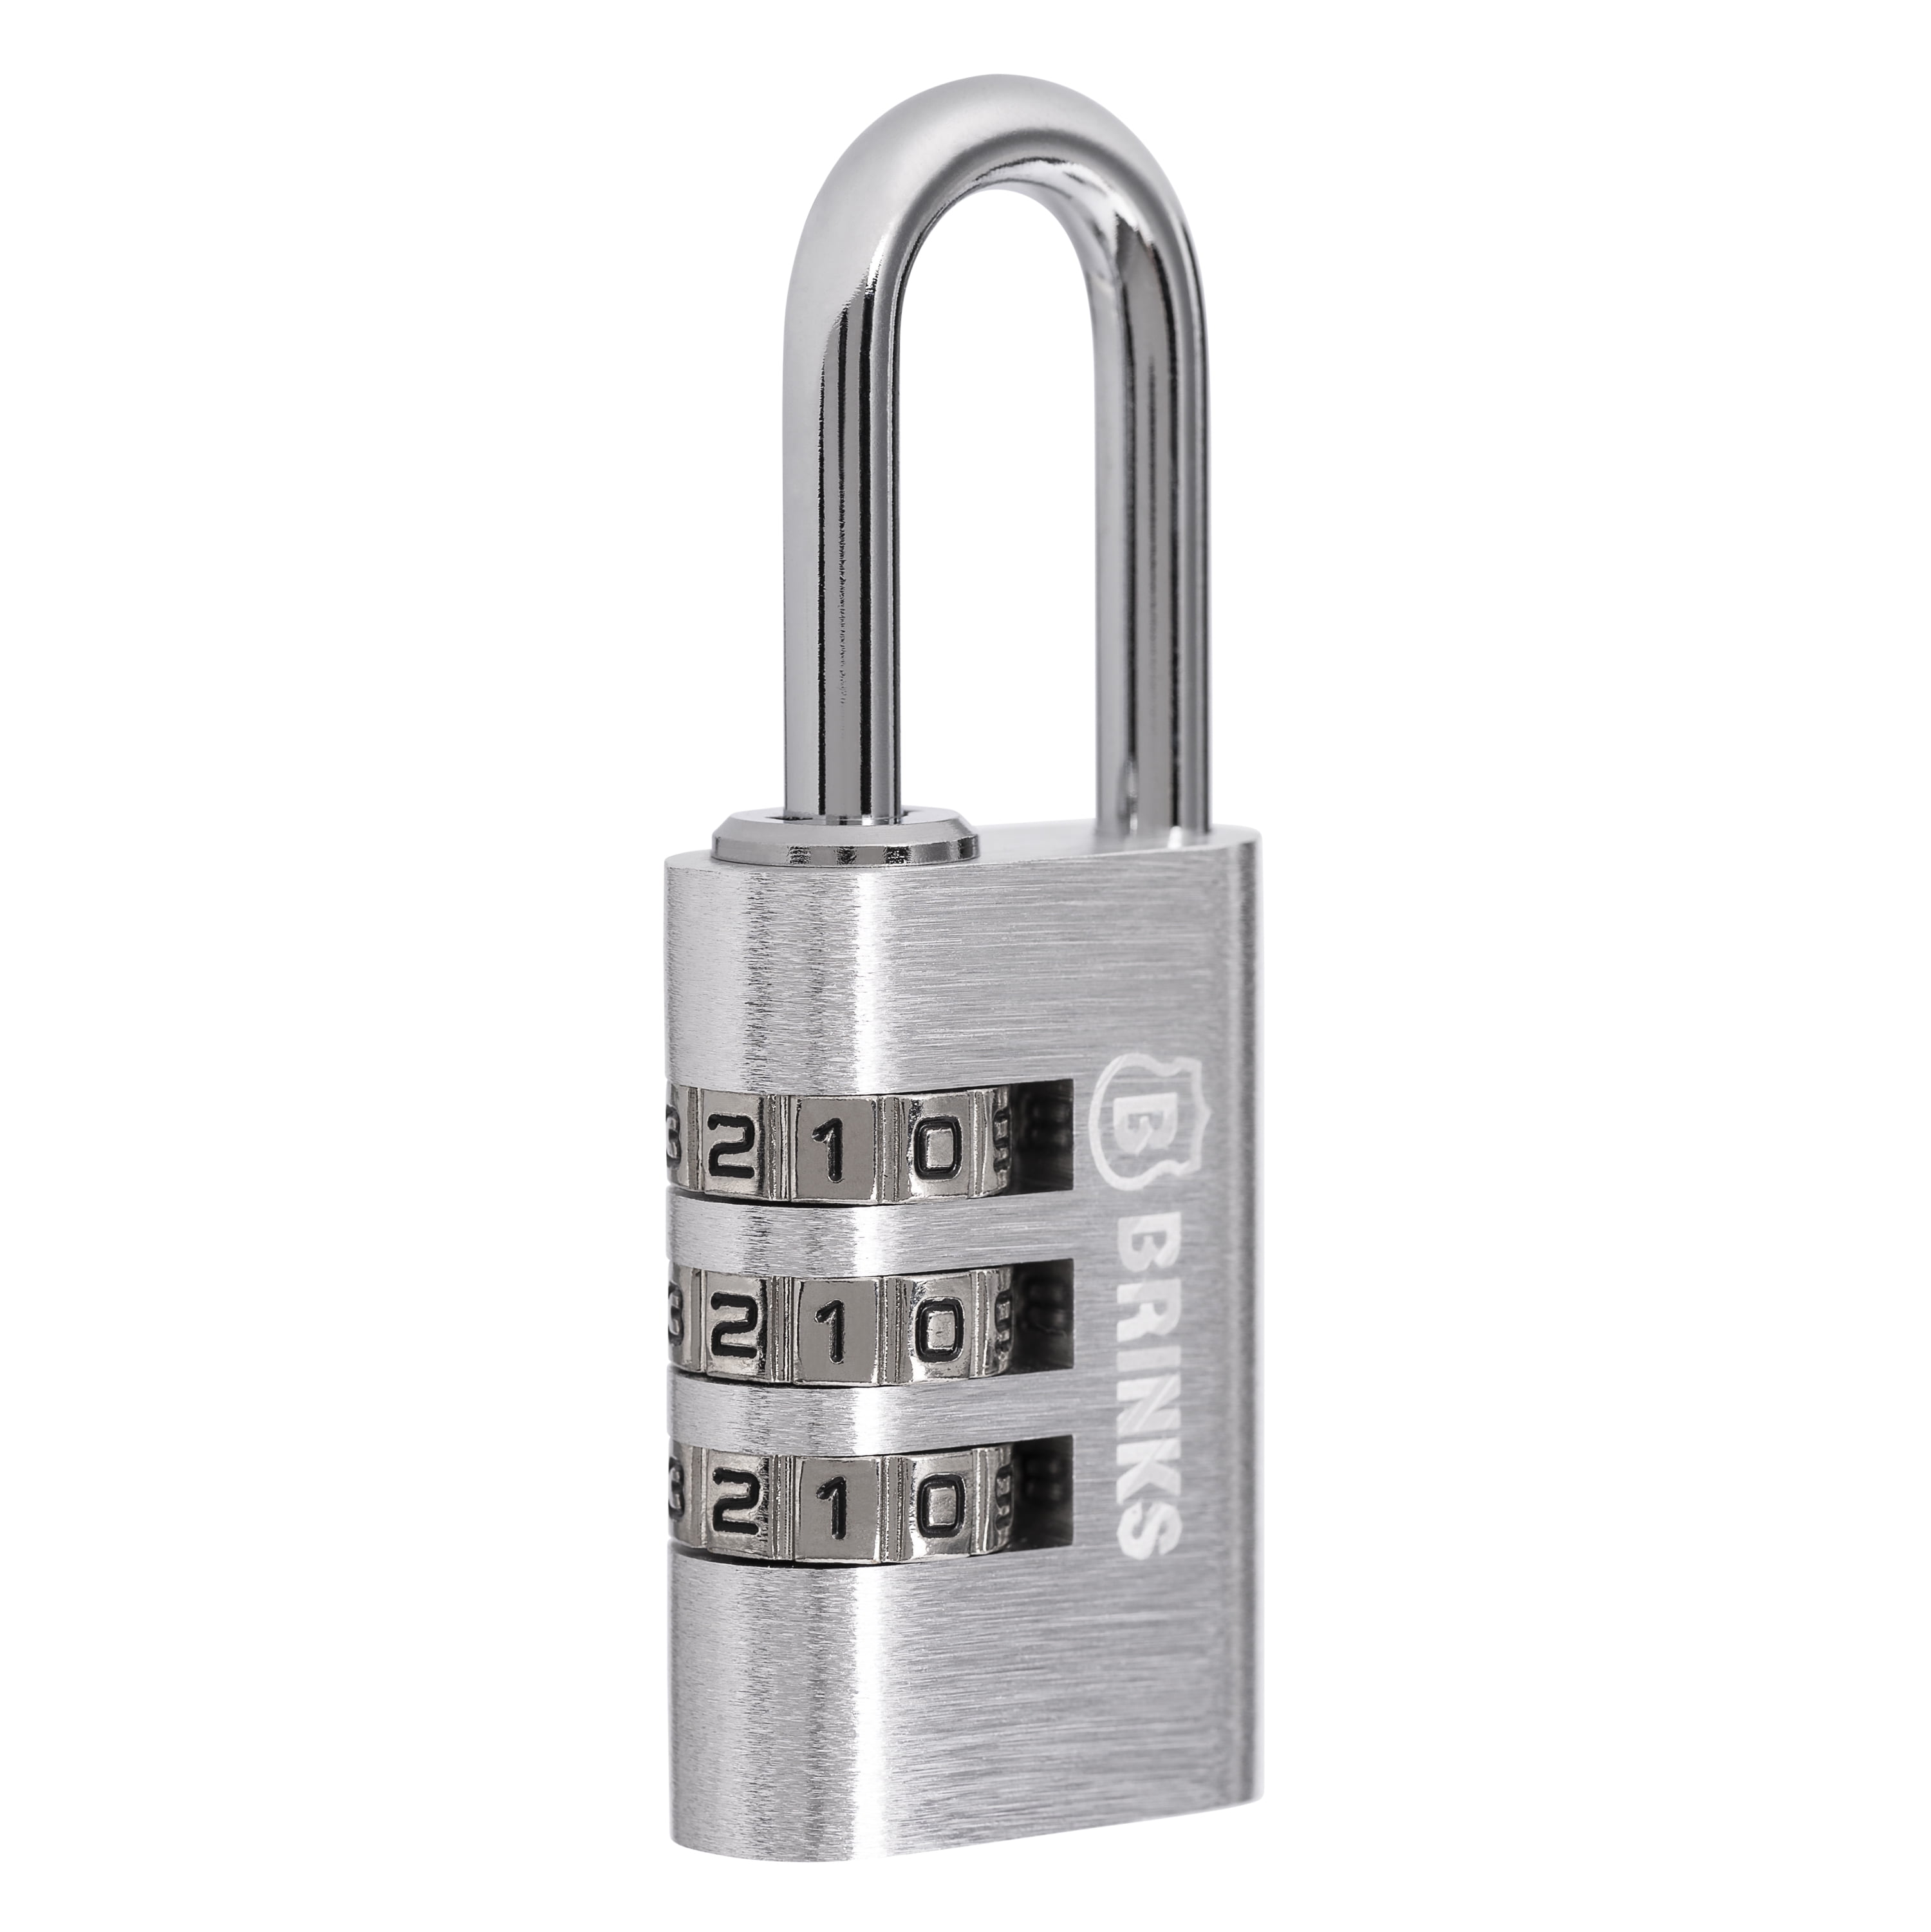 D-Shaped High Security Padlock Heavy Duty Lock with 3 Keys for